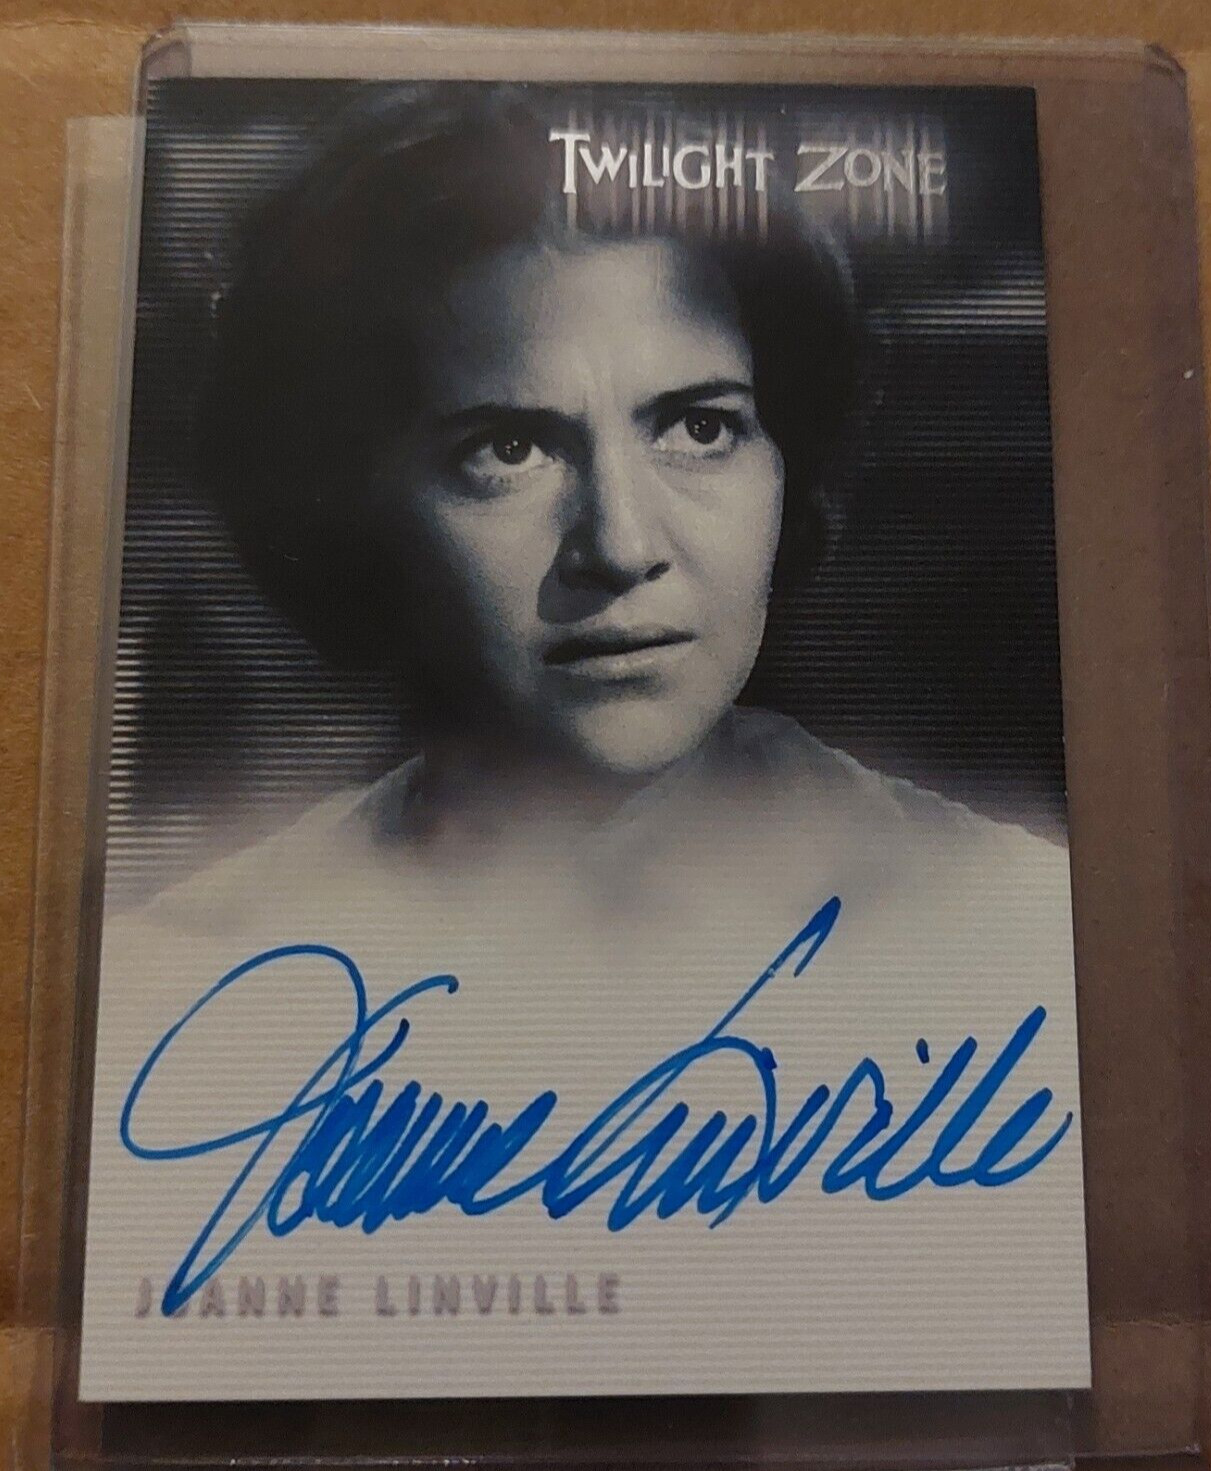 Twilight Zone Series 4 Science & Superstition Joanne Linville A68 autograph card